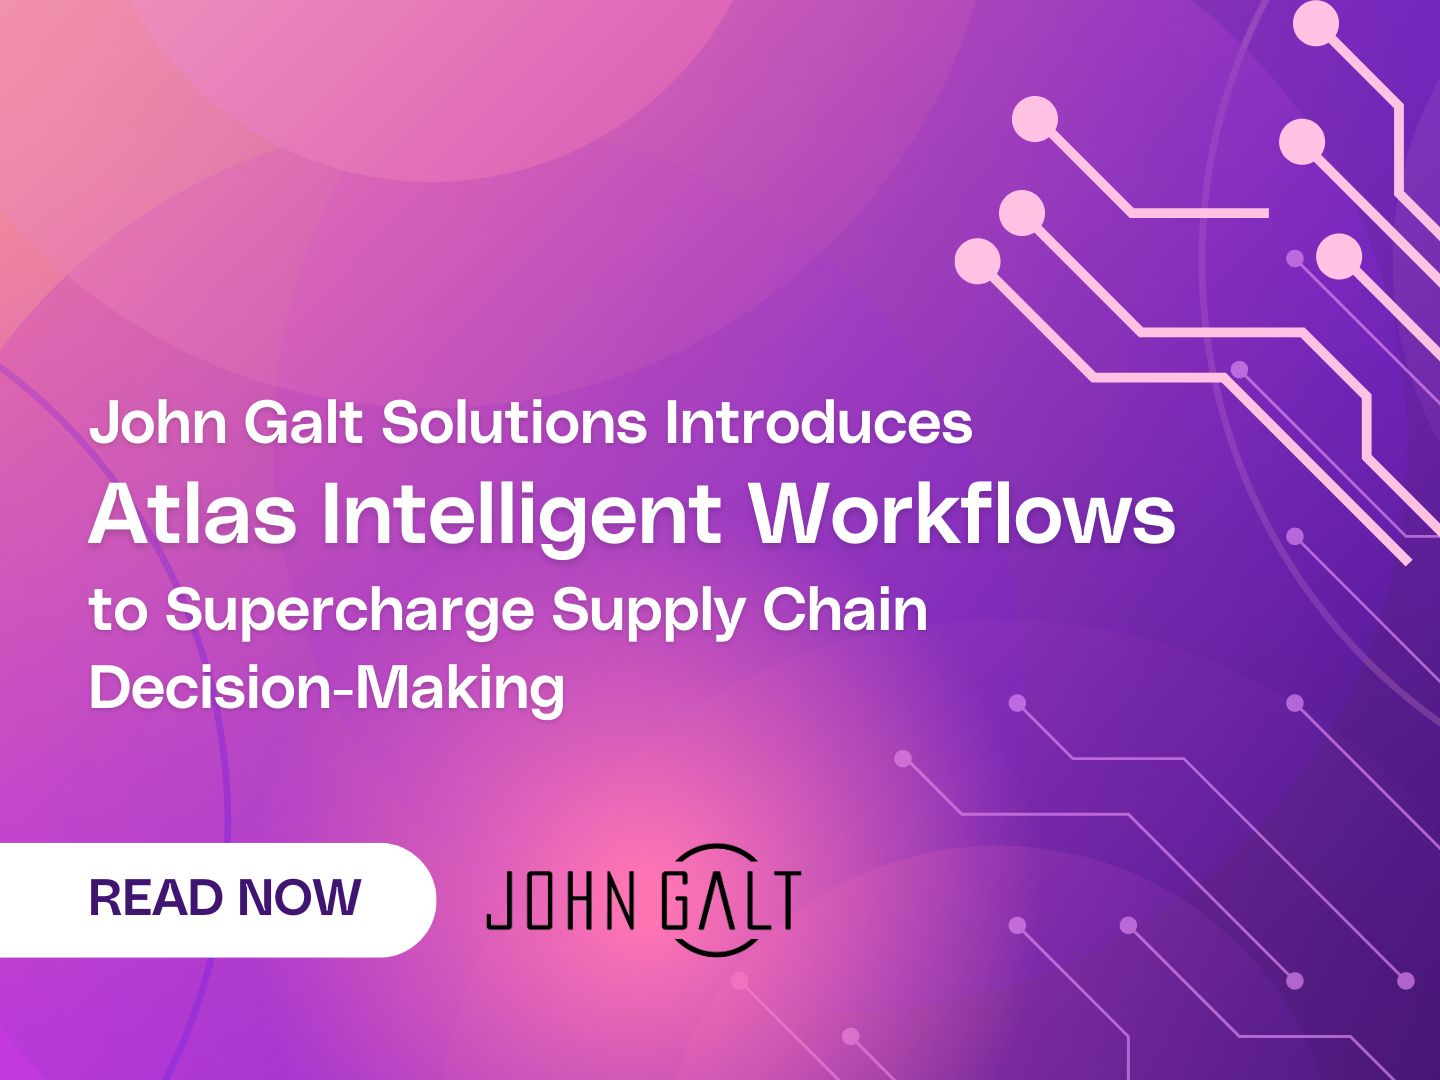 John Galt Solutions Introduces Atlas Intelligent Workflows to Supercharge Supply Chain Decision-Making